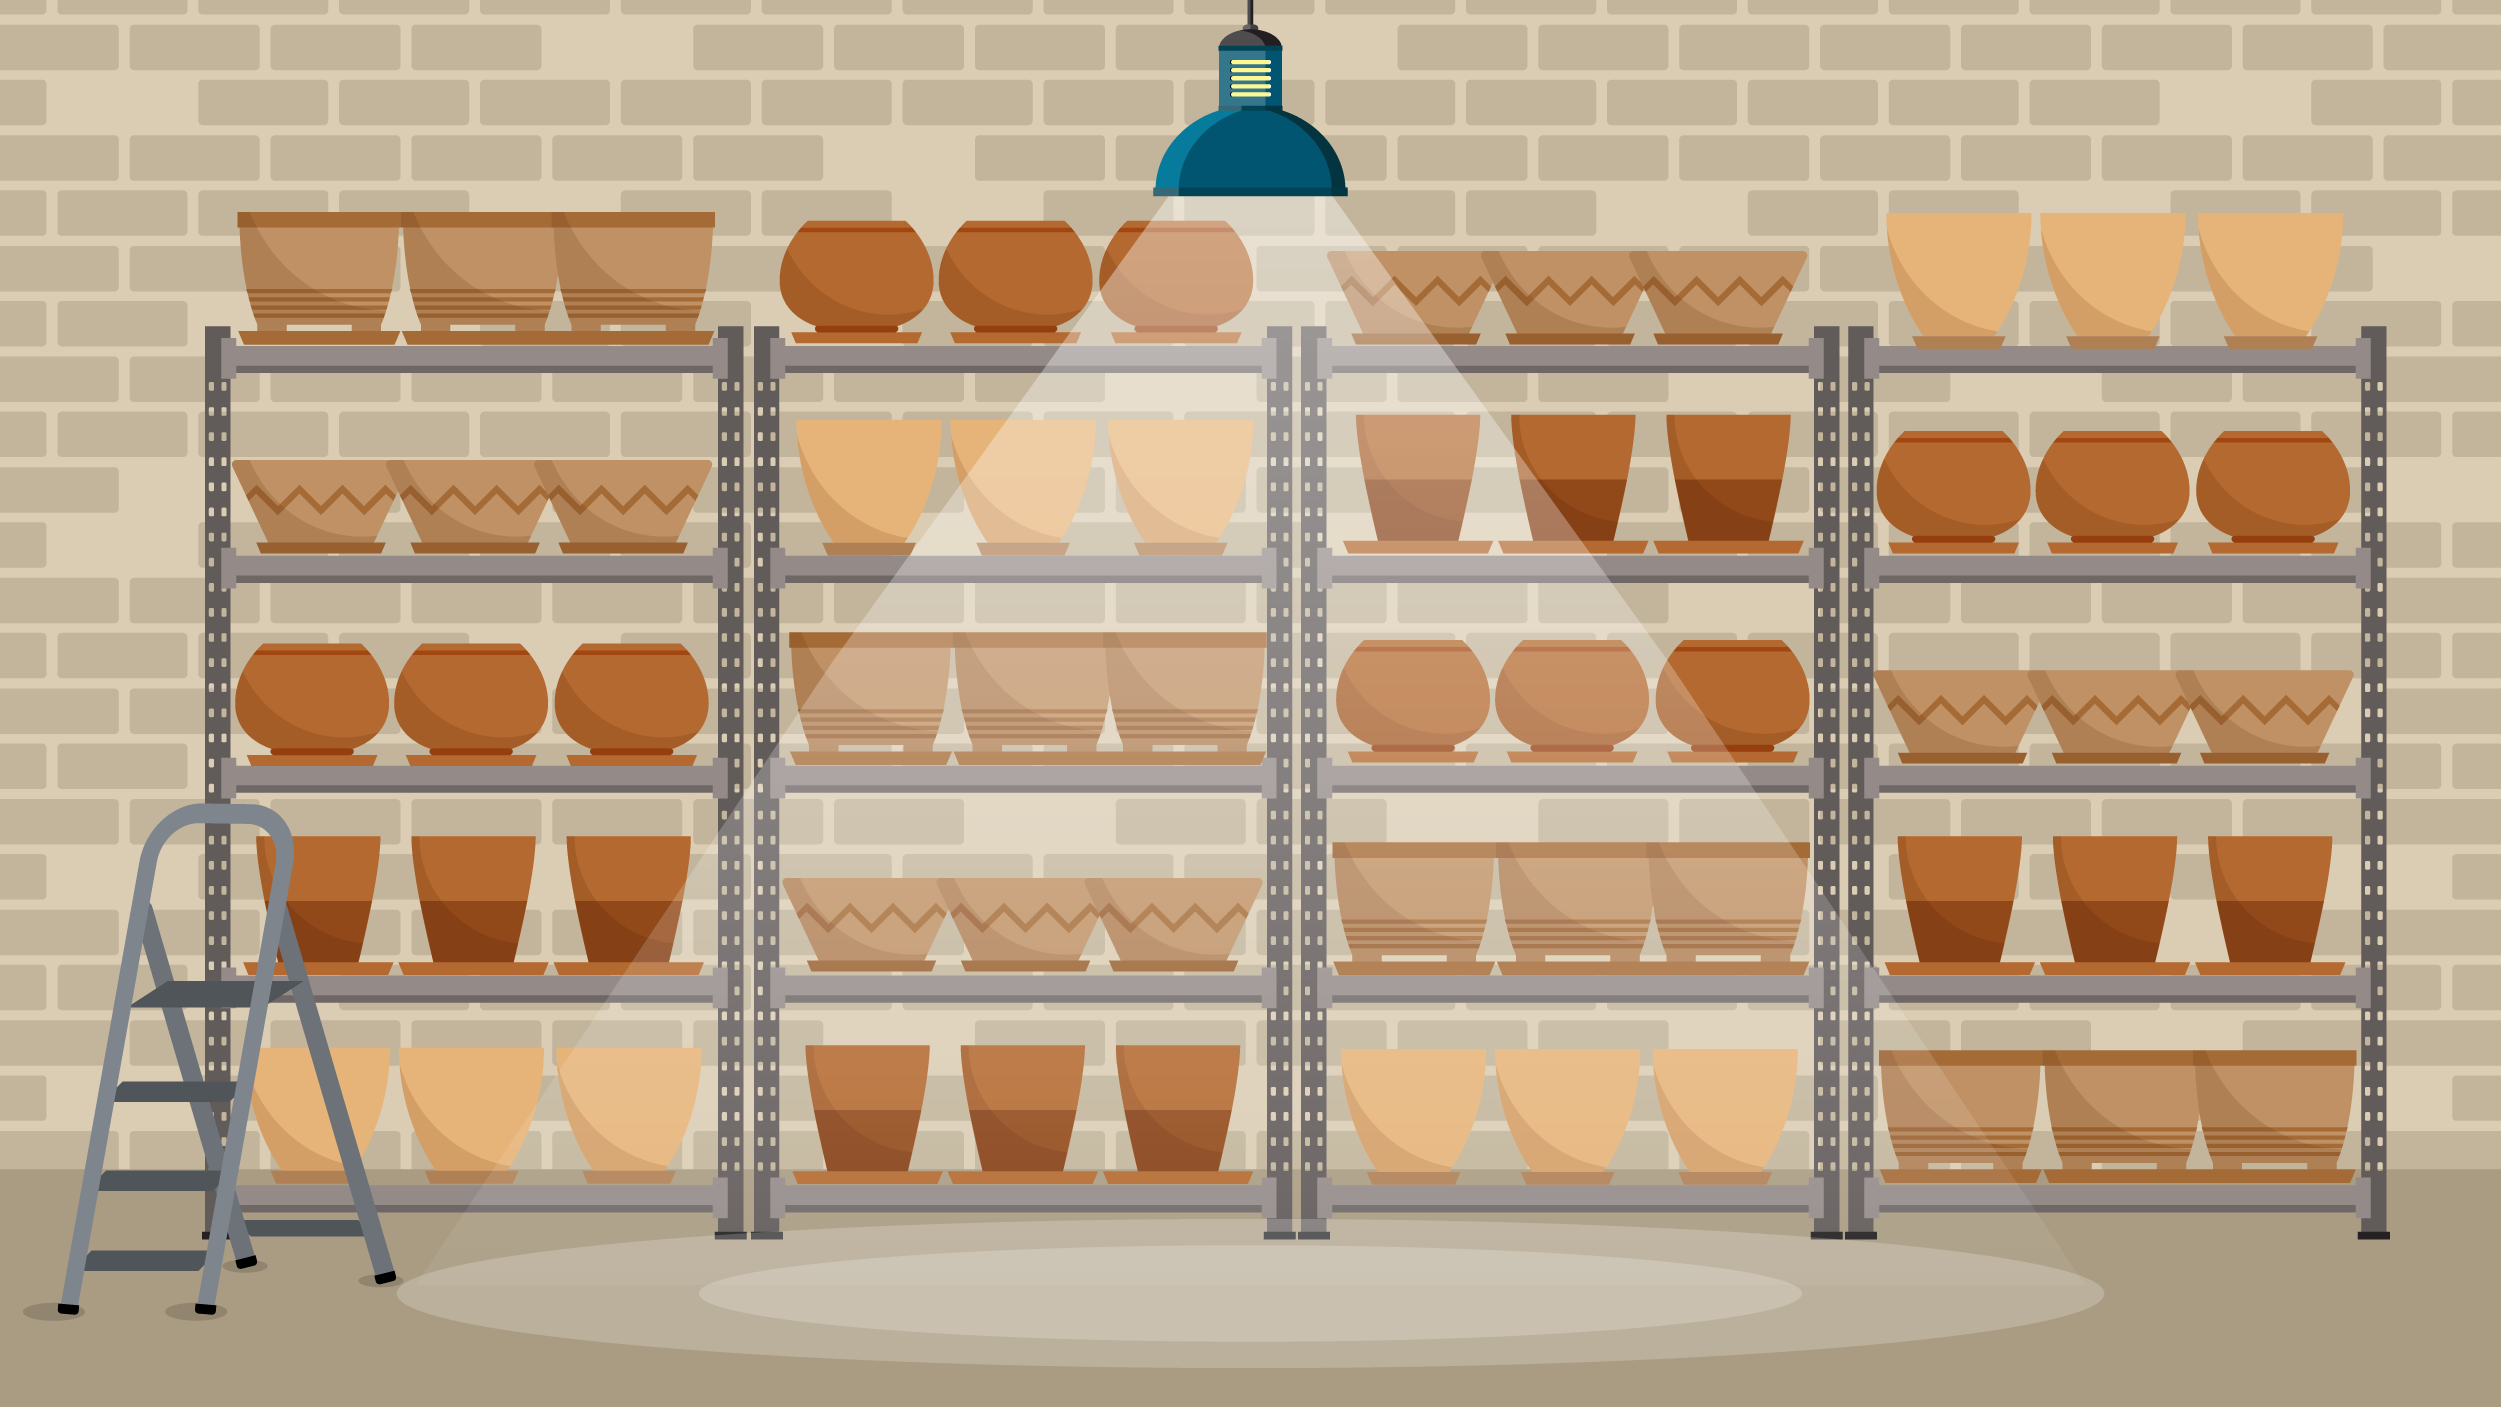 Illustration of pots stacked neatly on shelves.